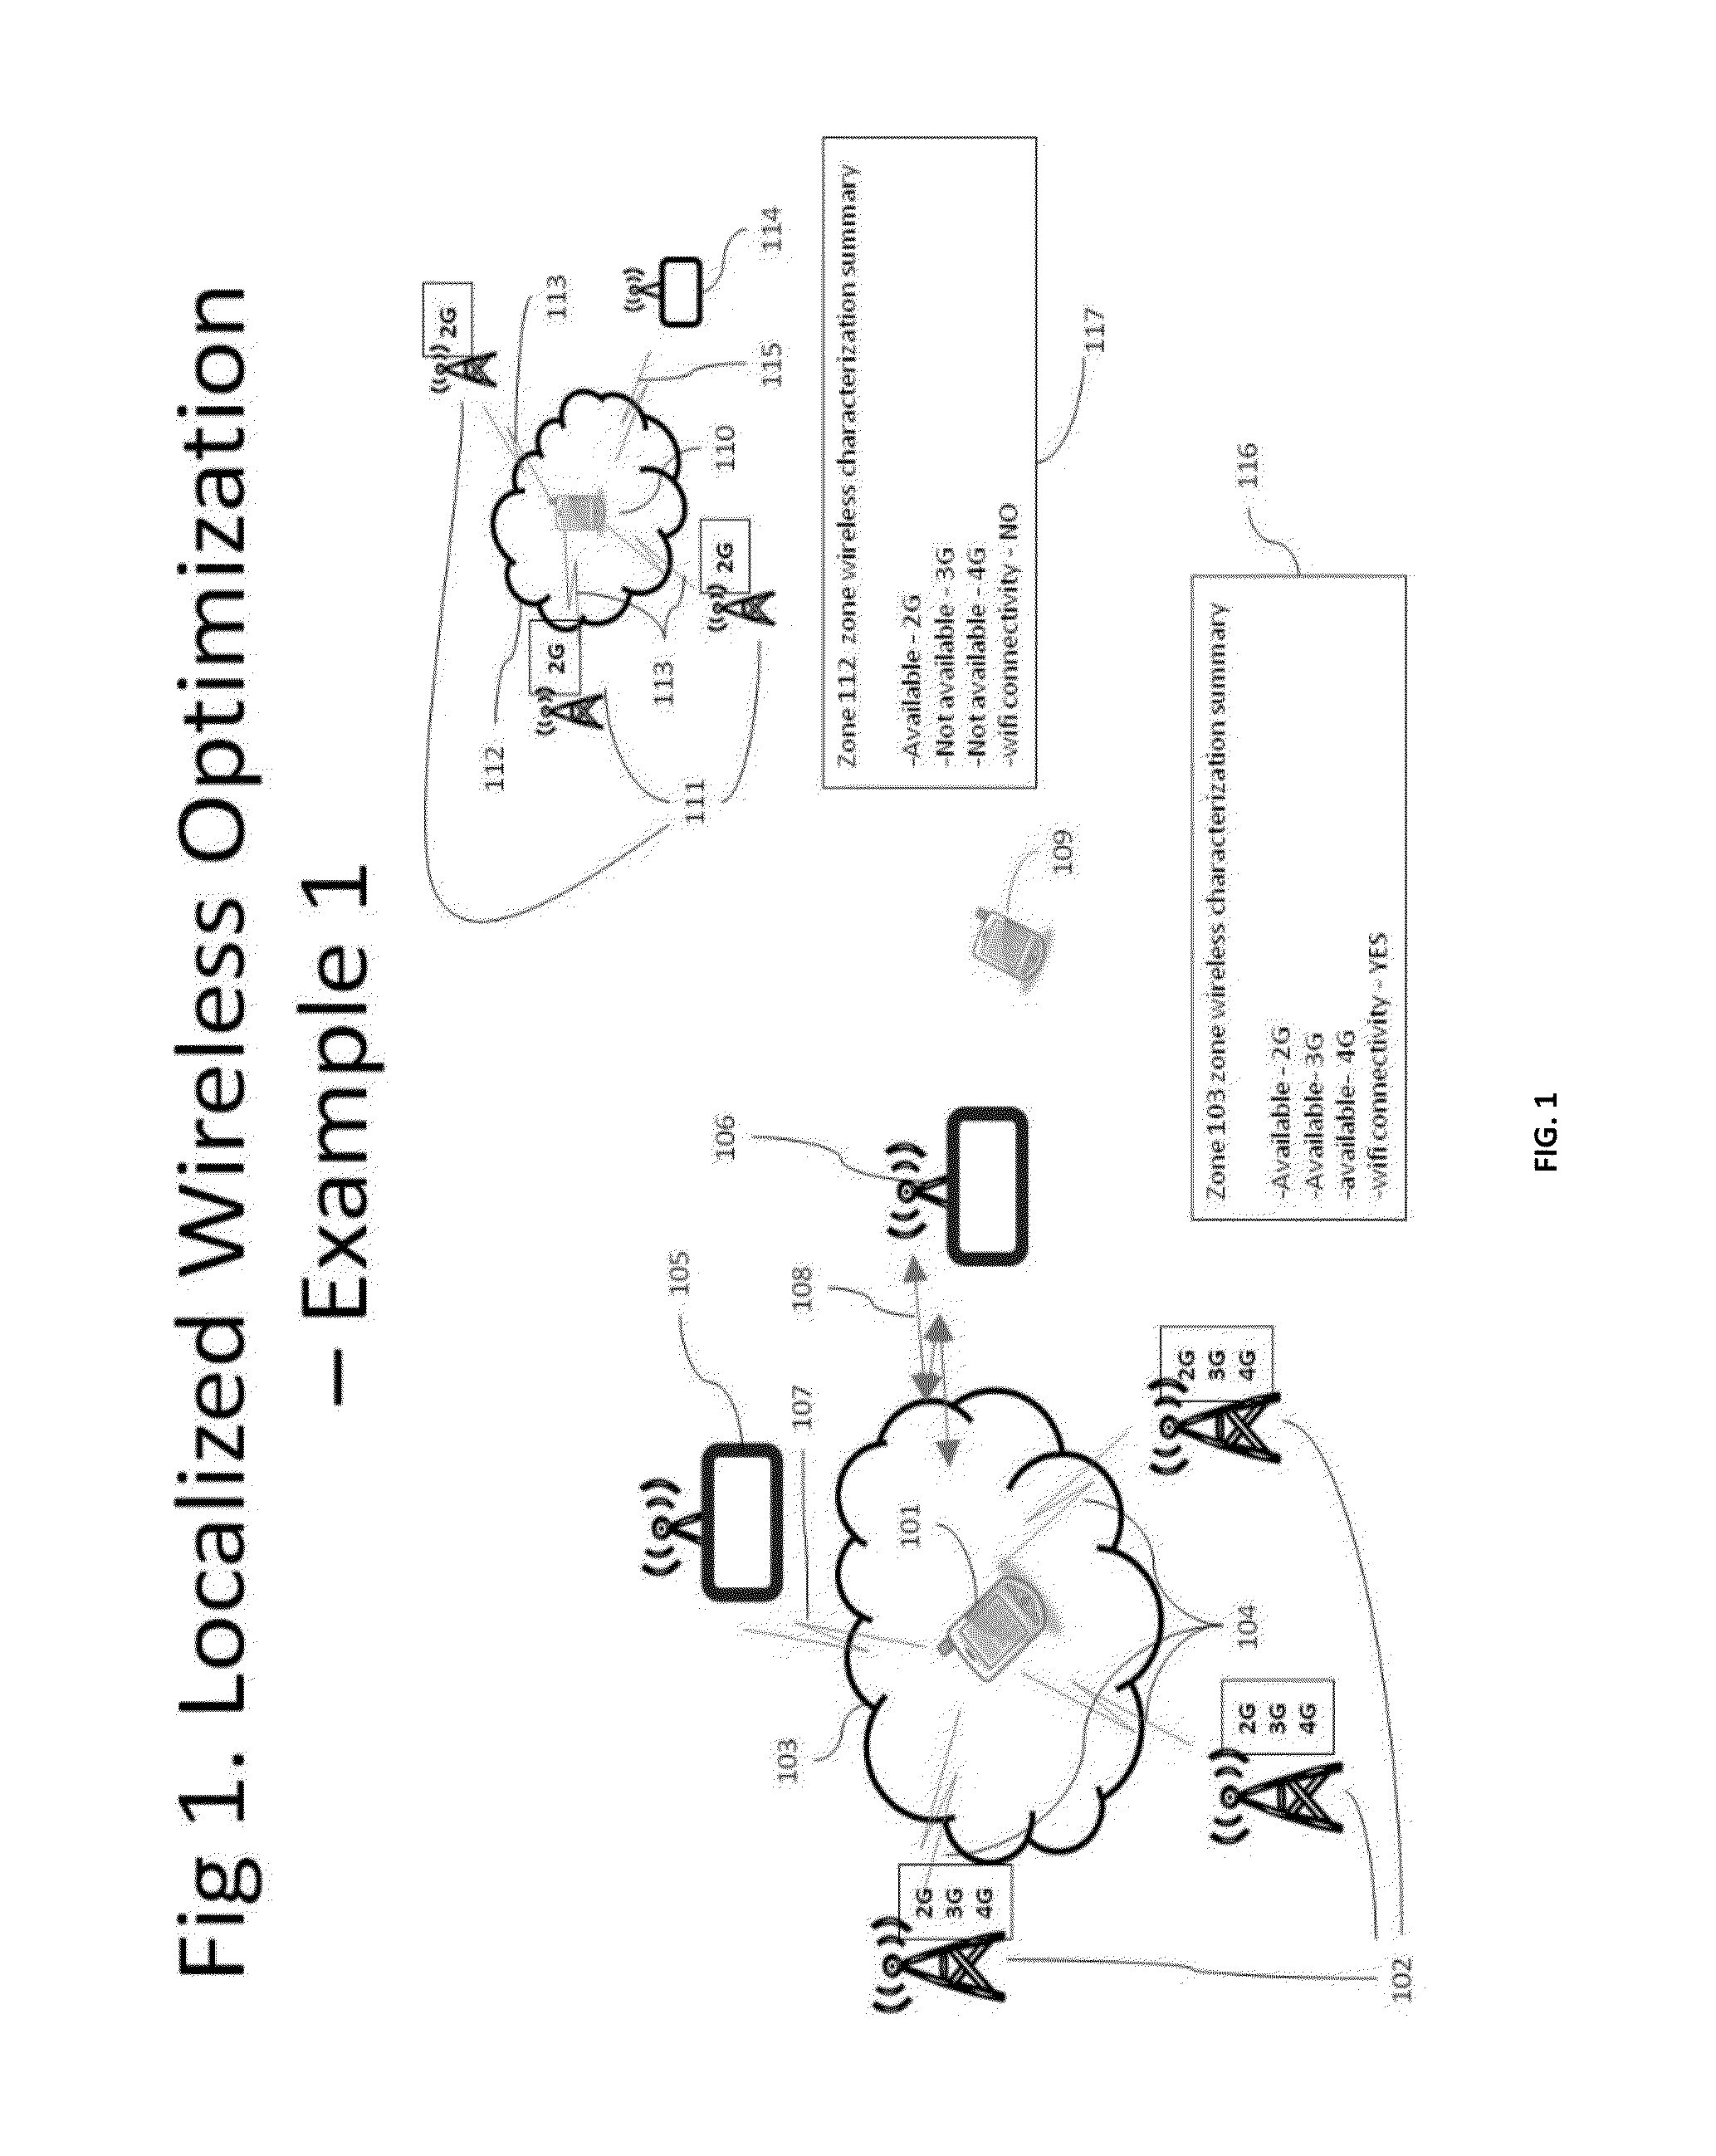 Method and apparatus for locally optimizing wireless operation in mobile devices